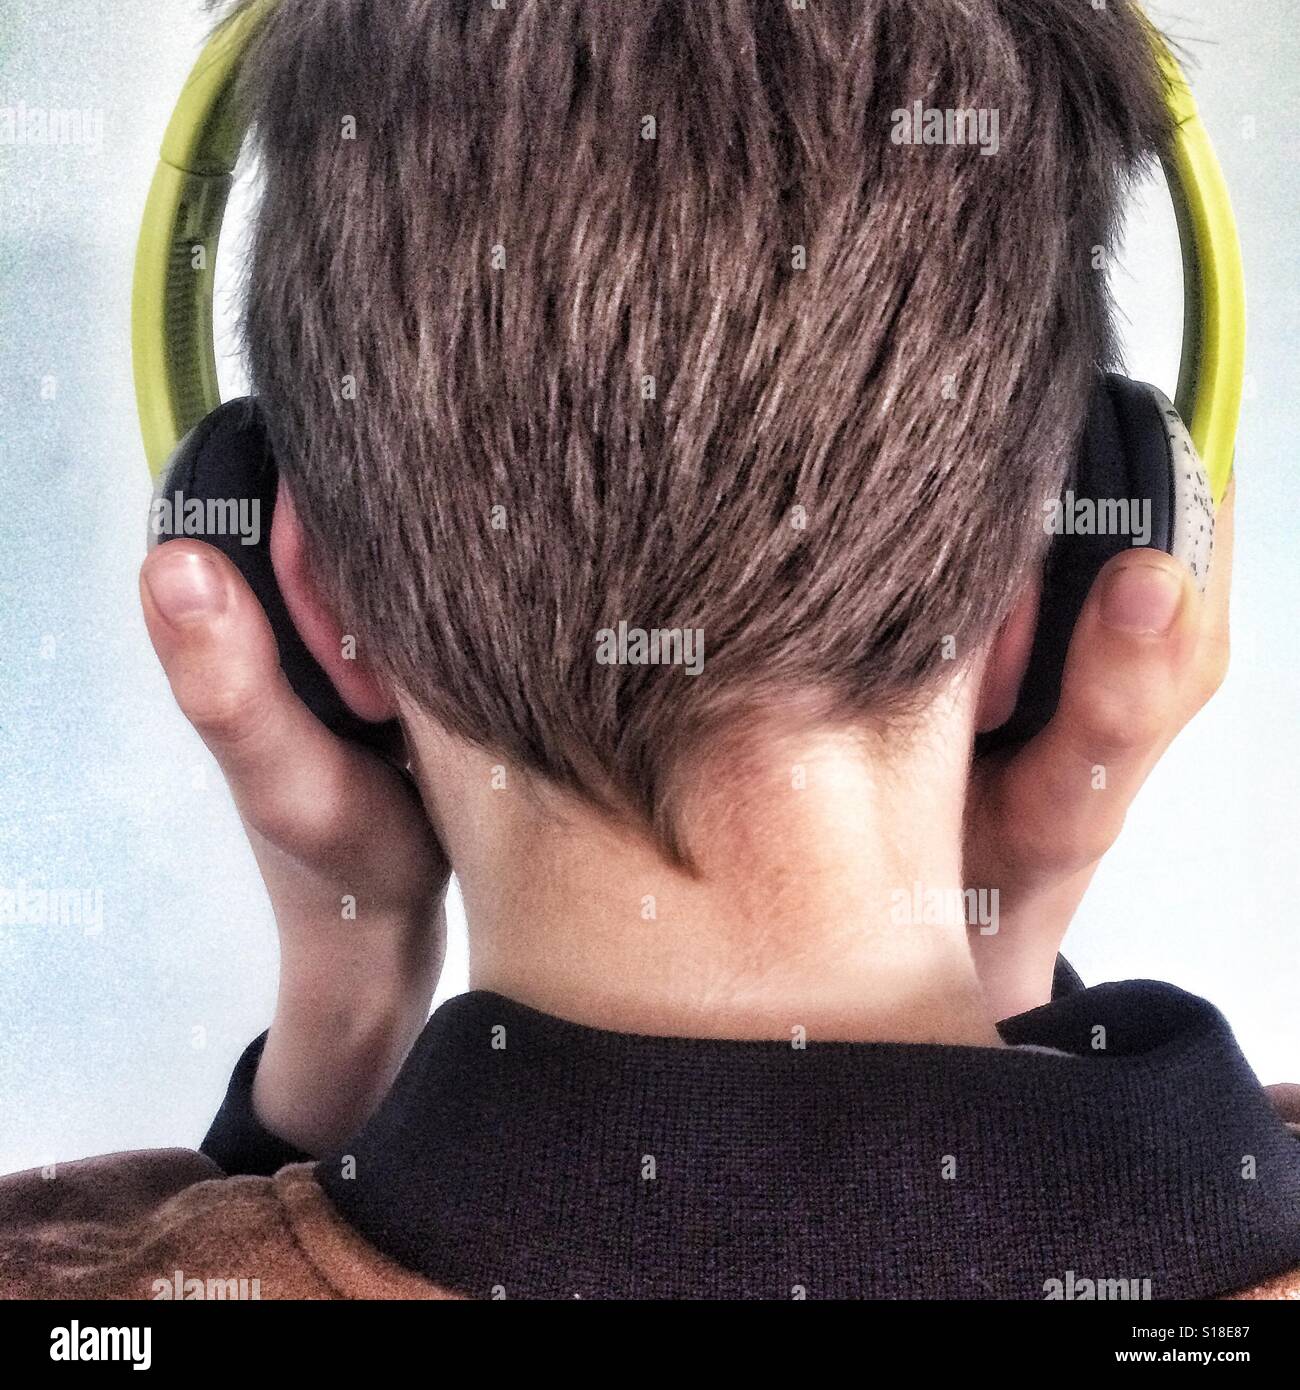 A young boy listening to music on his headphones Stock Photo